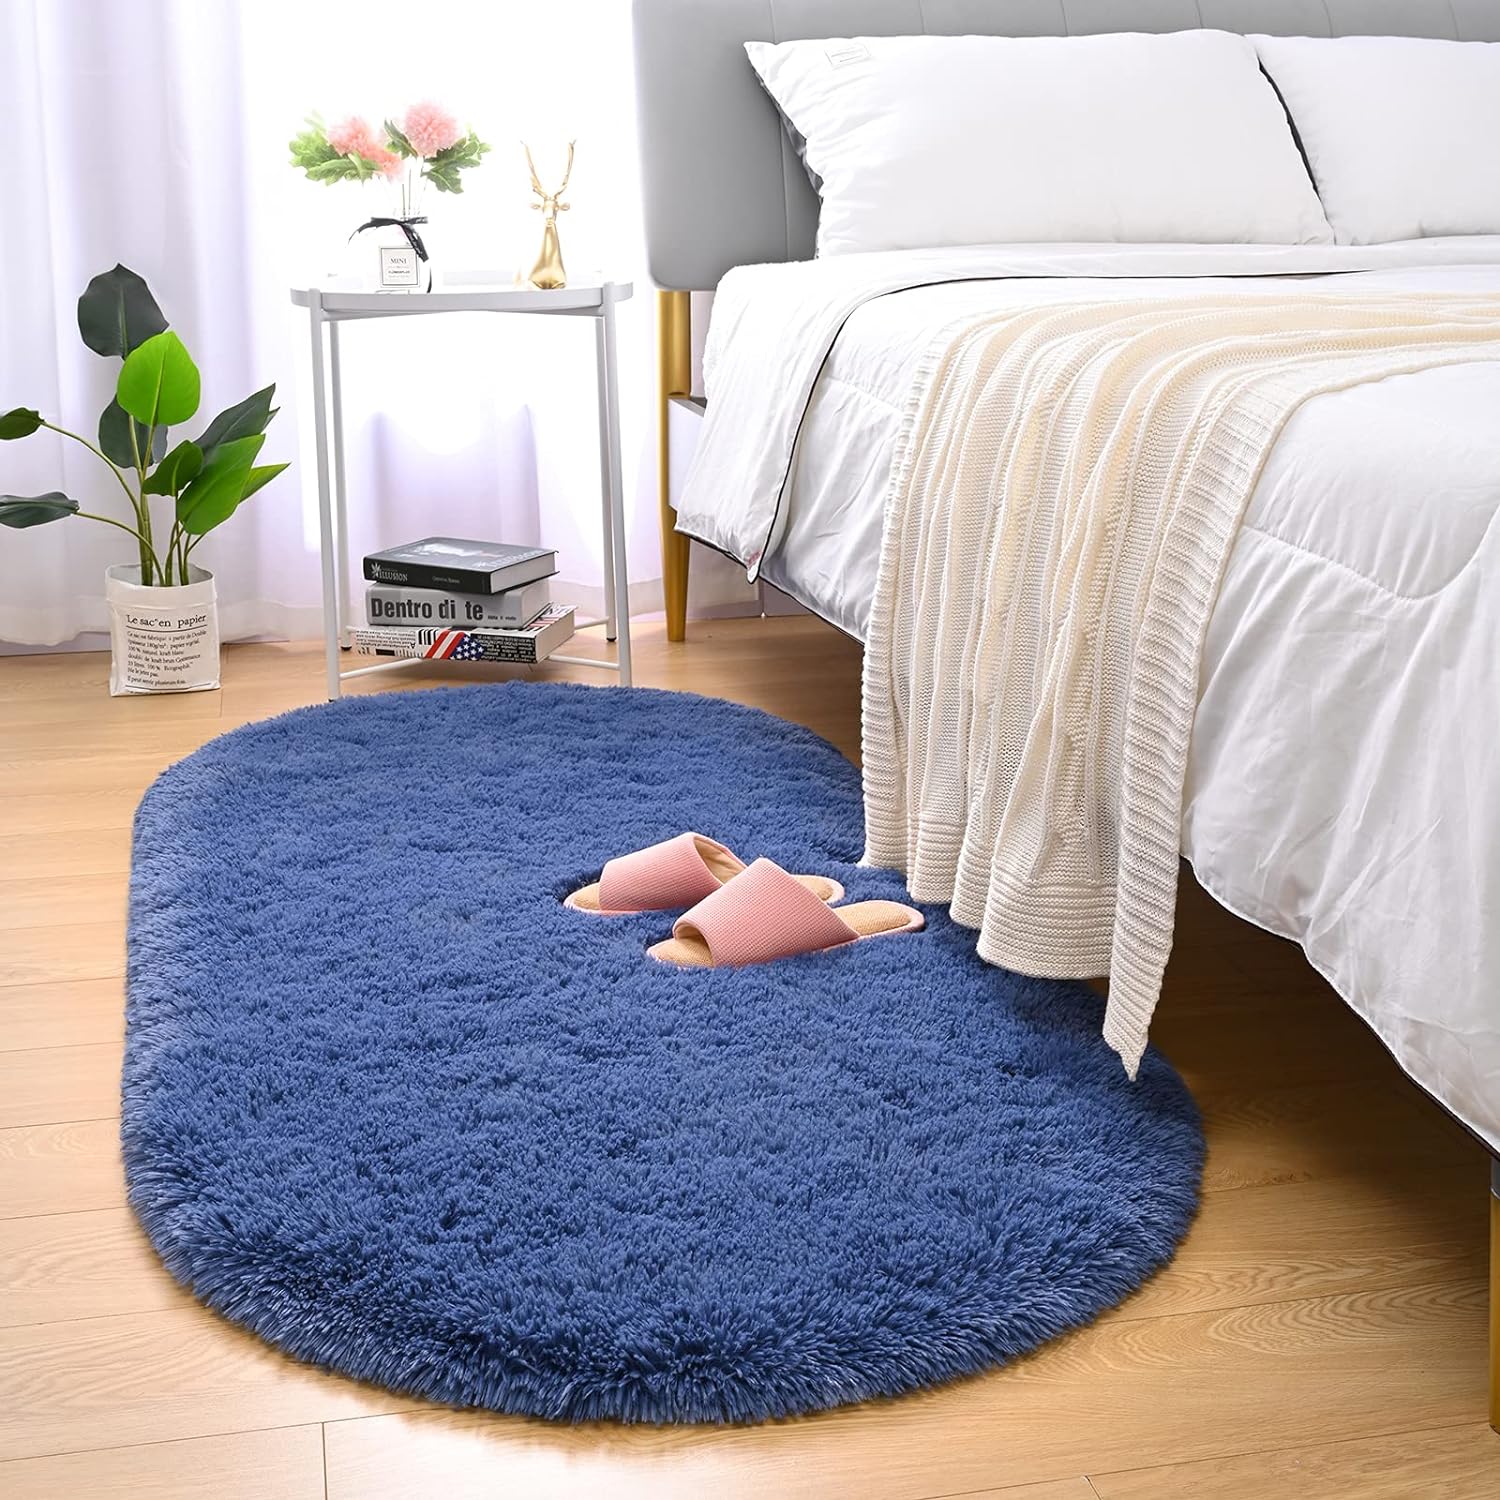 Merelax Soft Shaggy Rug for Kids Bedroom Oval 2.6'x5.3' Light Navy Plush Fluffy Carpet for Living Room, Furry Carpet for Teen Girls Room, Anti-skid Fuzzy Comfy Rug for Nursery Decor Cute Baby Play Mat